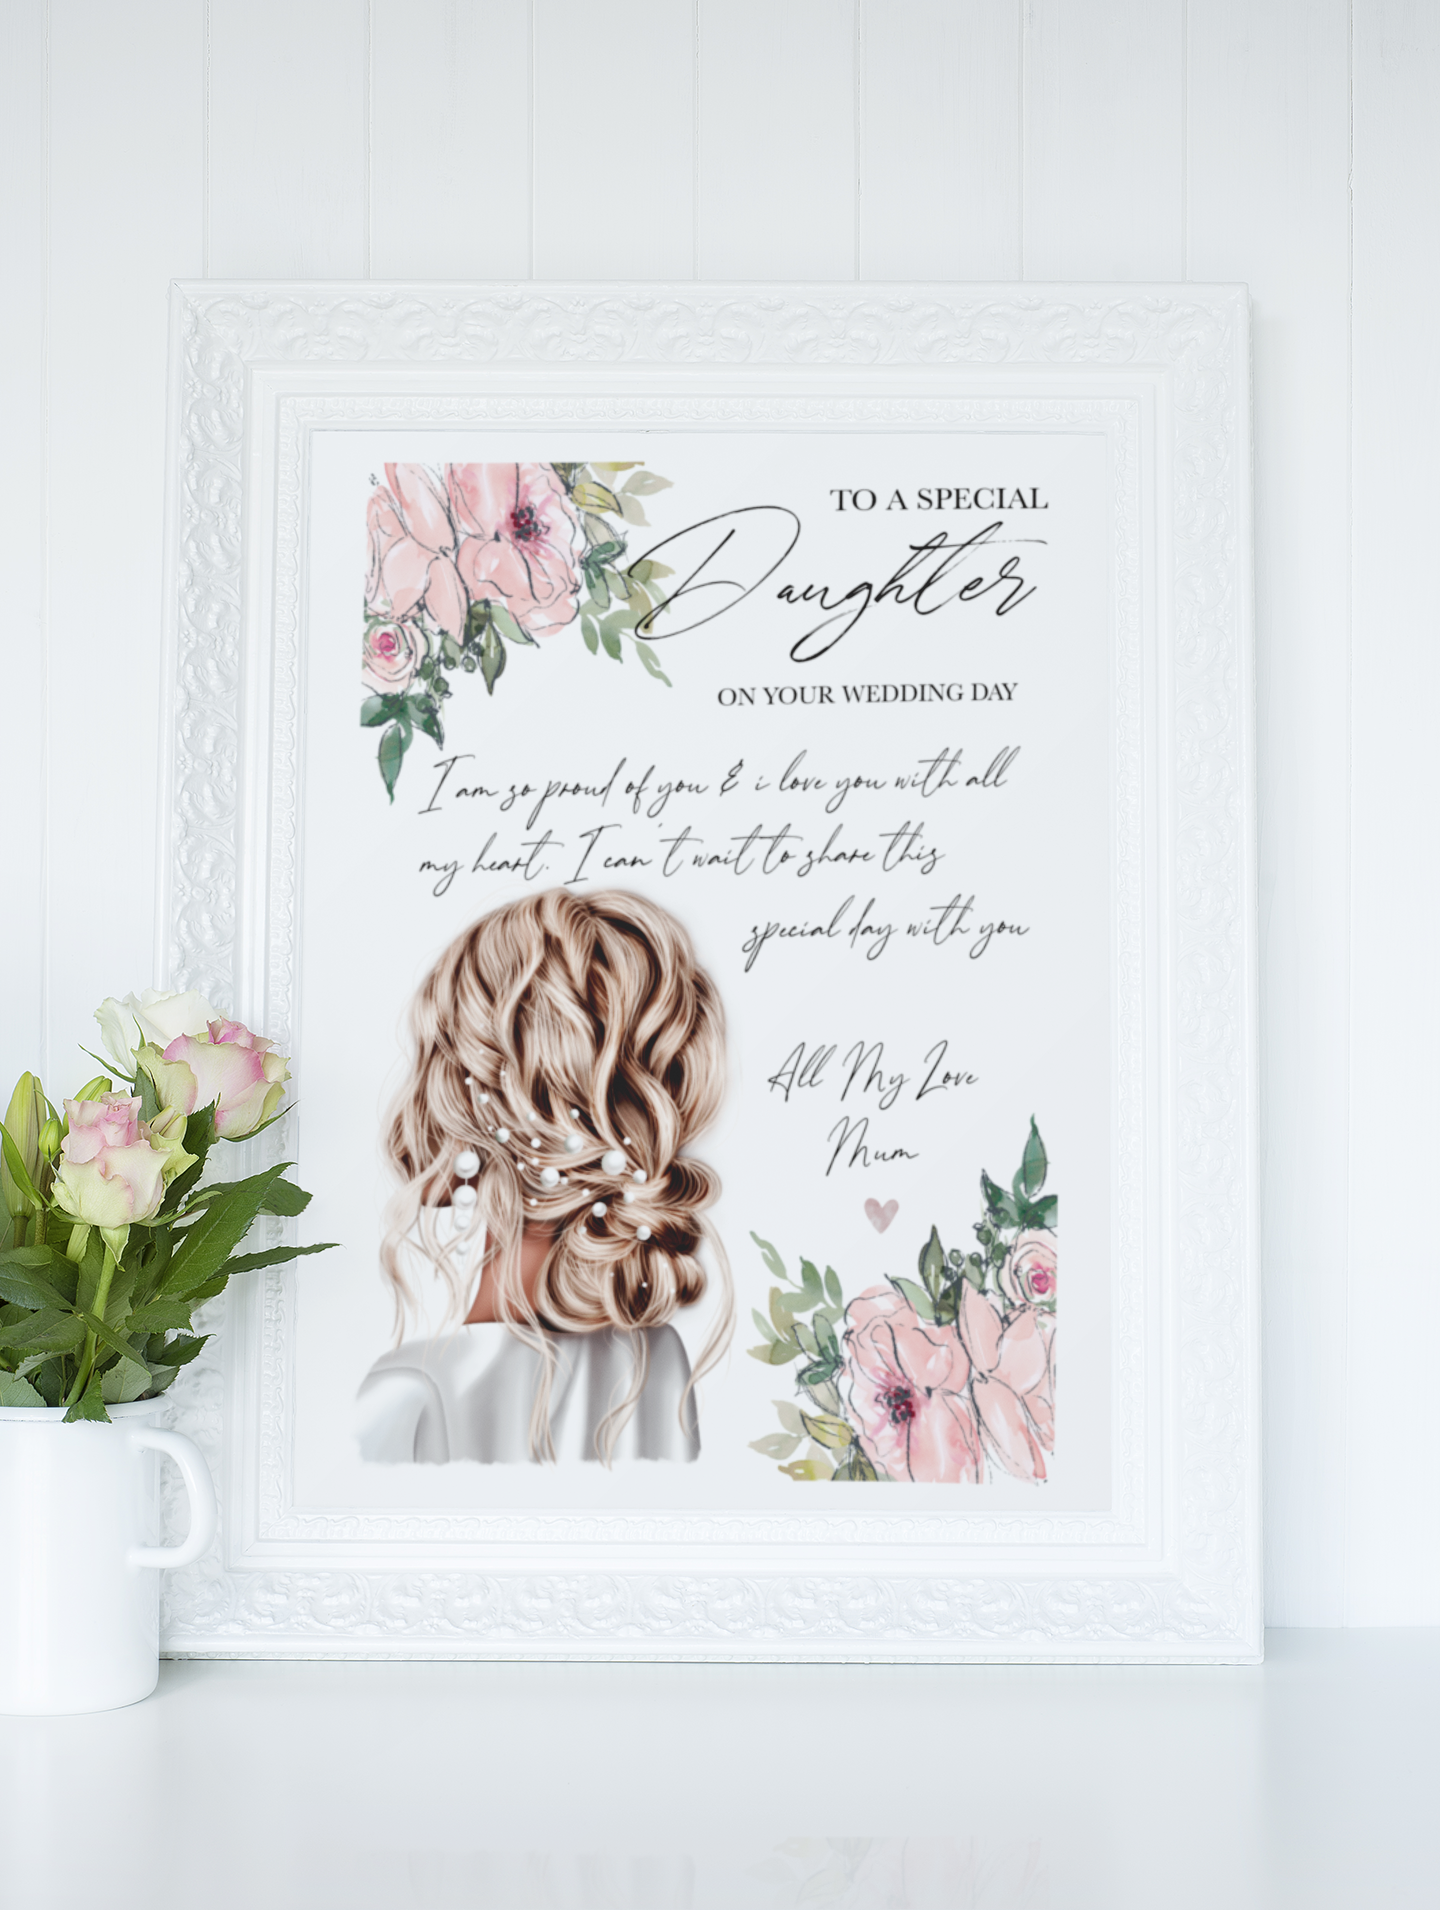 Wedding print for a daughter with a bride on the front surrounded by a pink floral design. The wording reads to a special daughter' and has a custom message below in a lovely handwritten font.